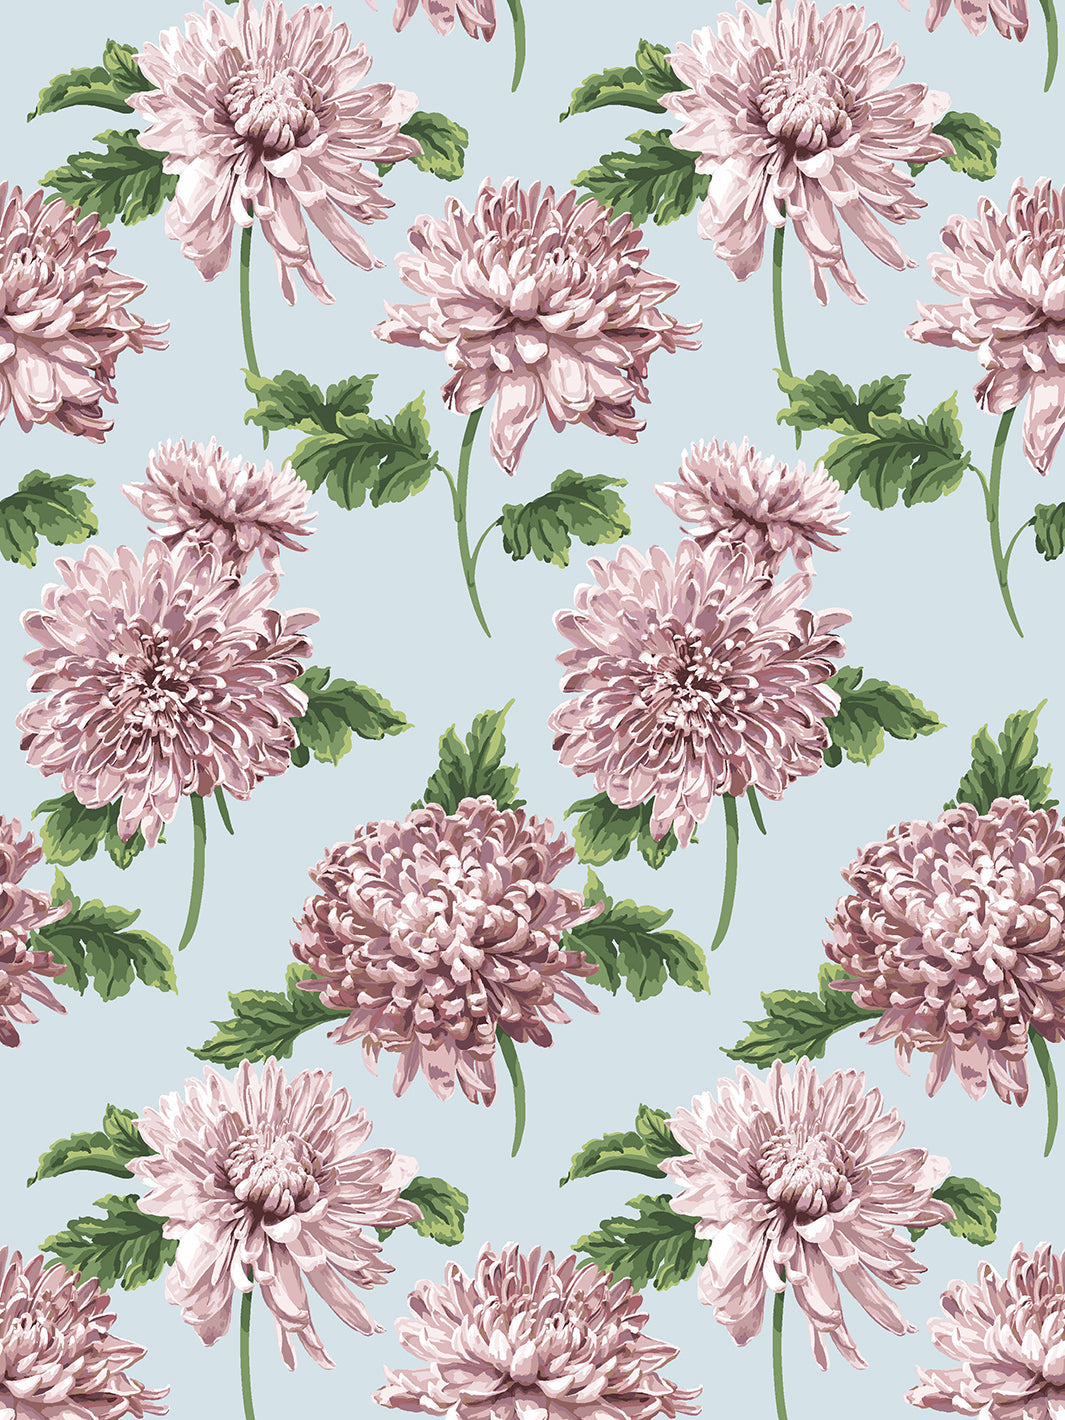 'Mums for Marion Small' Wallpaper by Sarah Jessica Parker - Misty Blue